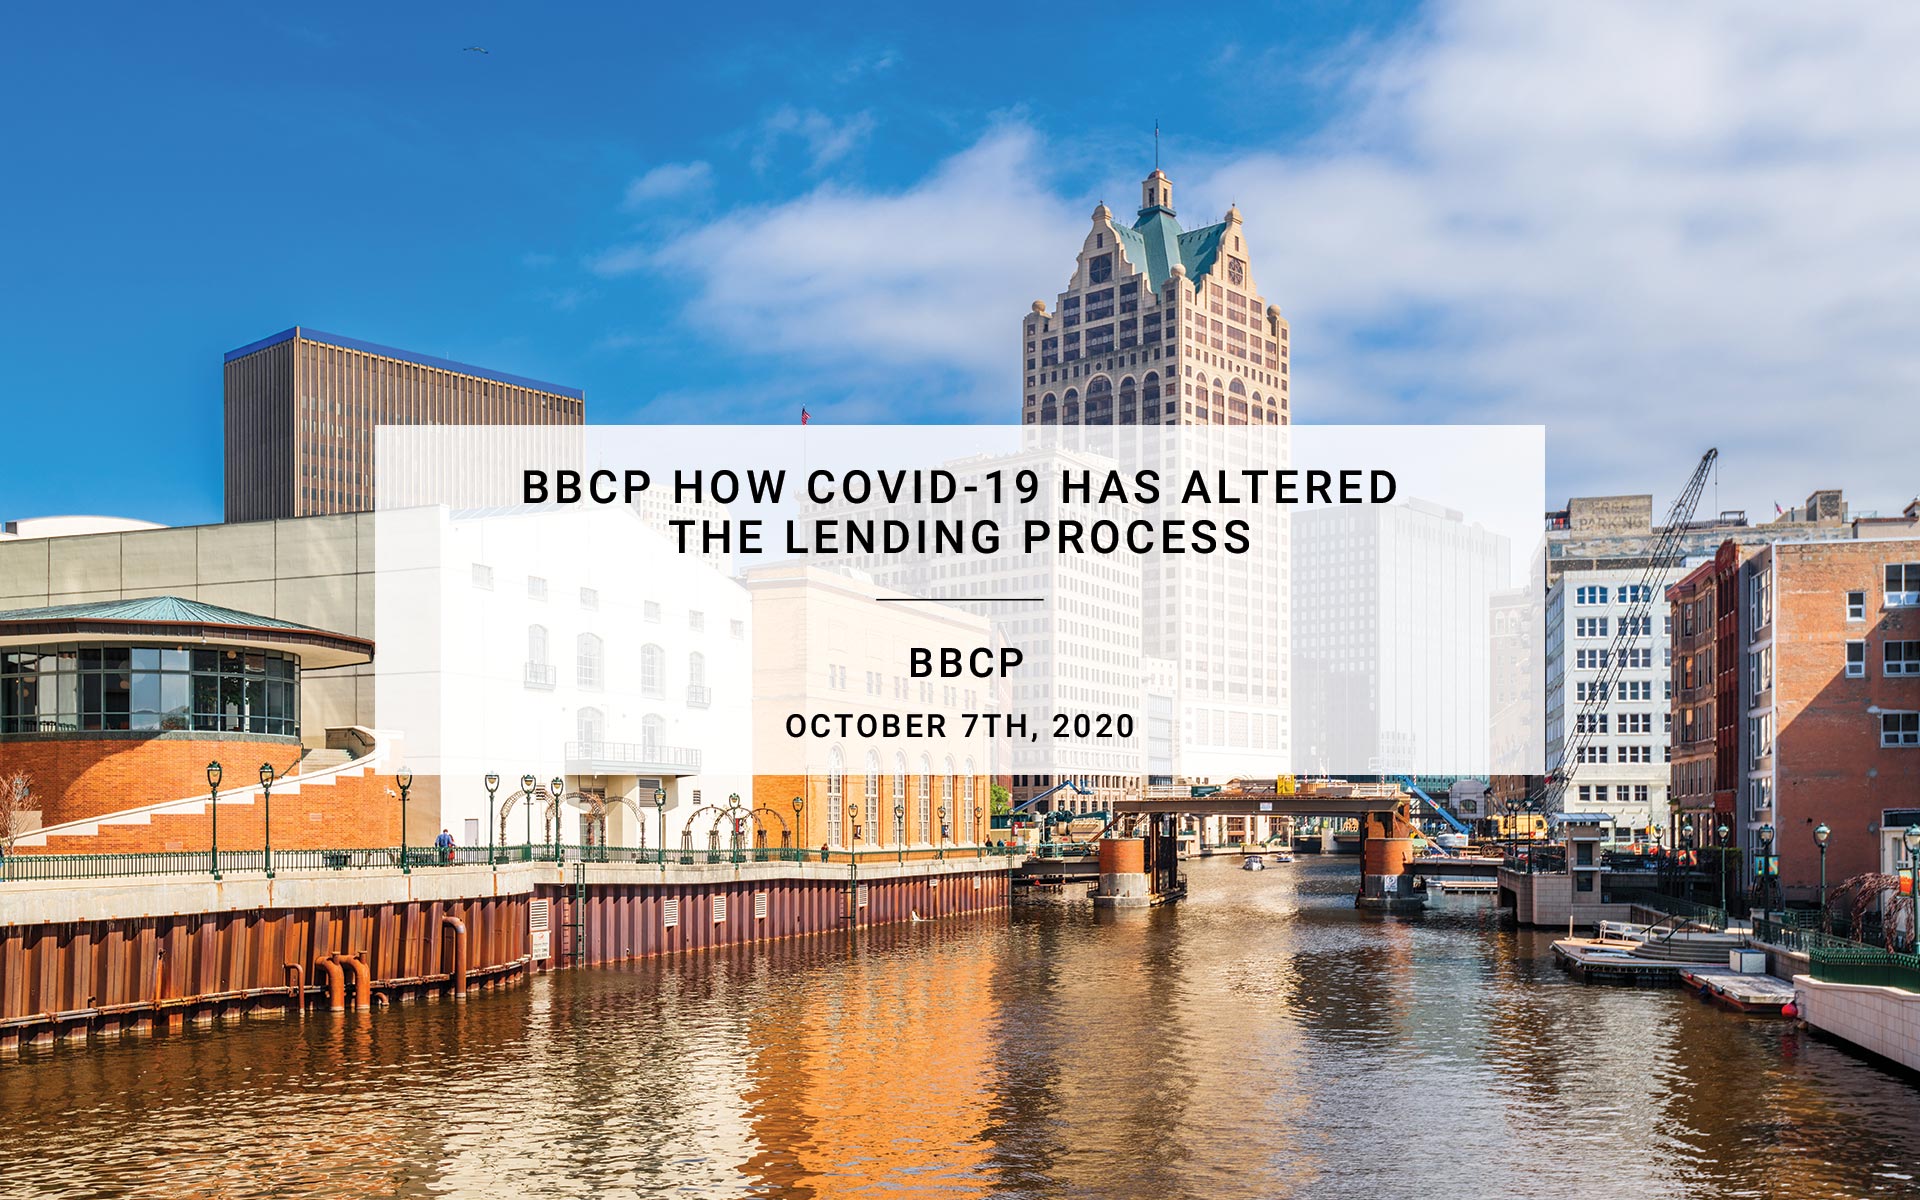 BBCP How COVID-19 Has Altered the Lending Process: Q&A | BBCP